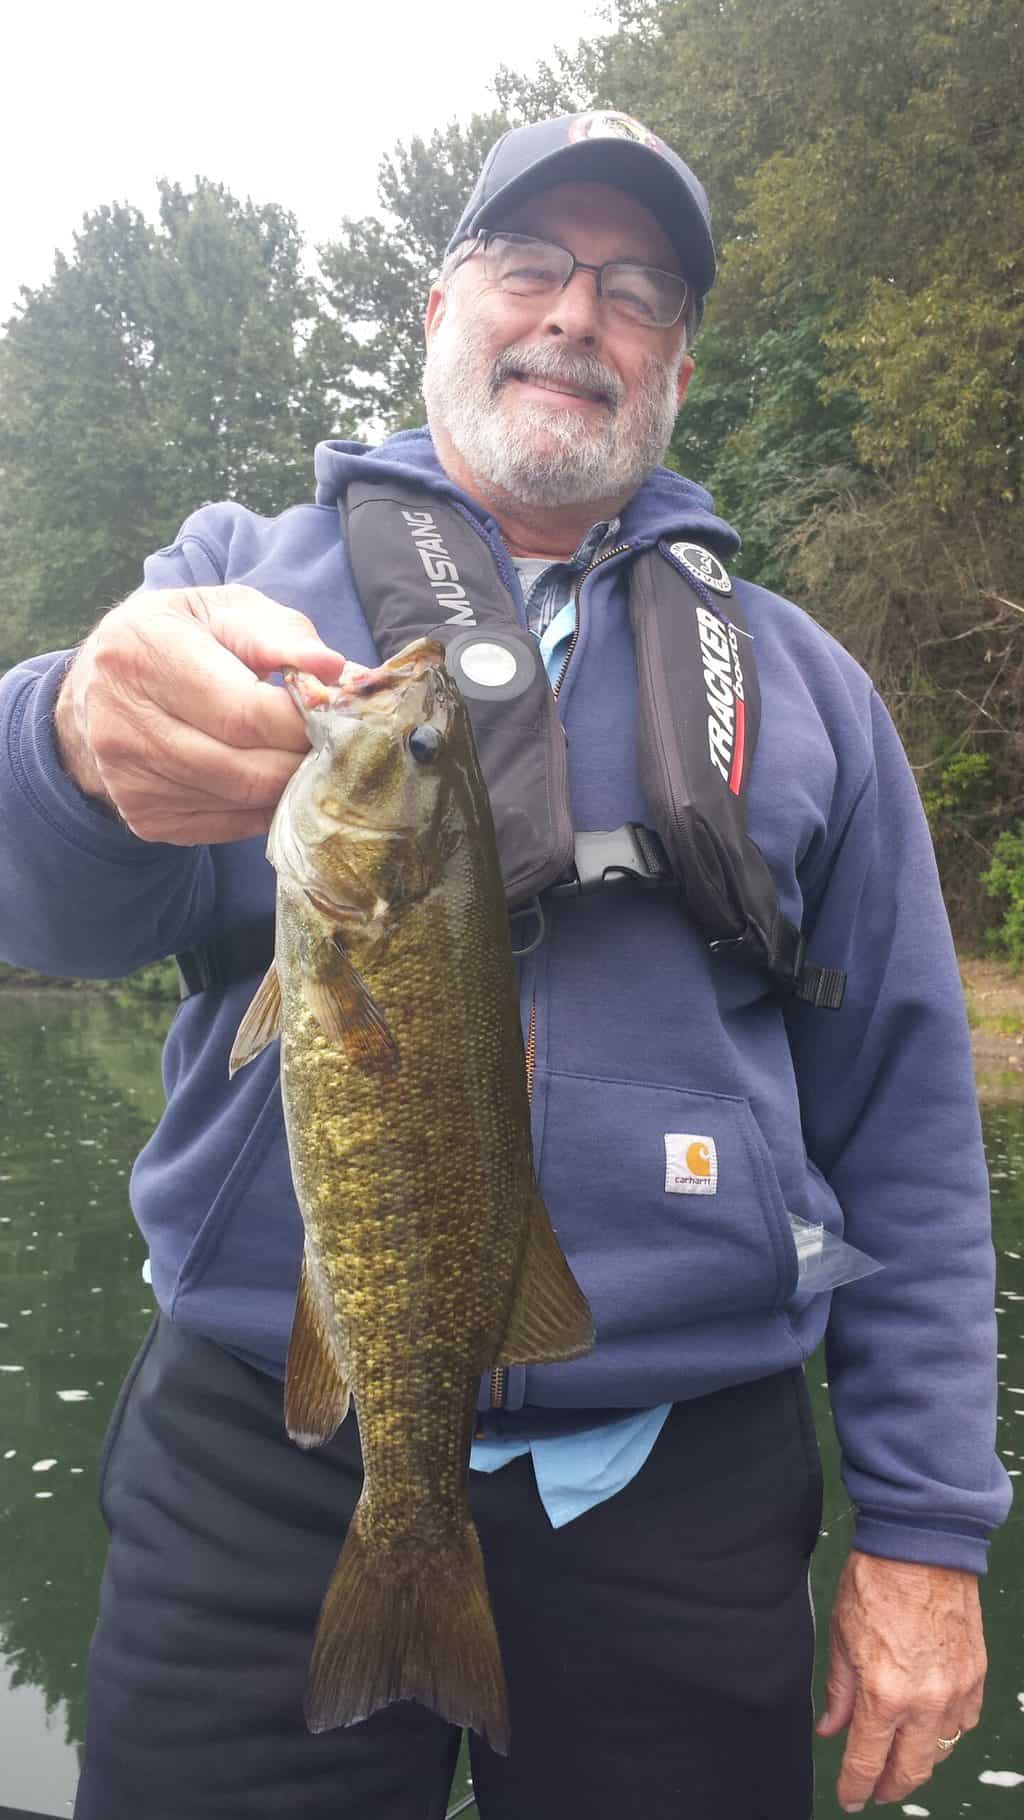 An angler holding a smallmouth bass caught in the Willamette River near Newberg in Yamhill County.